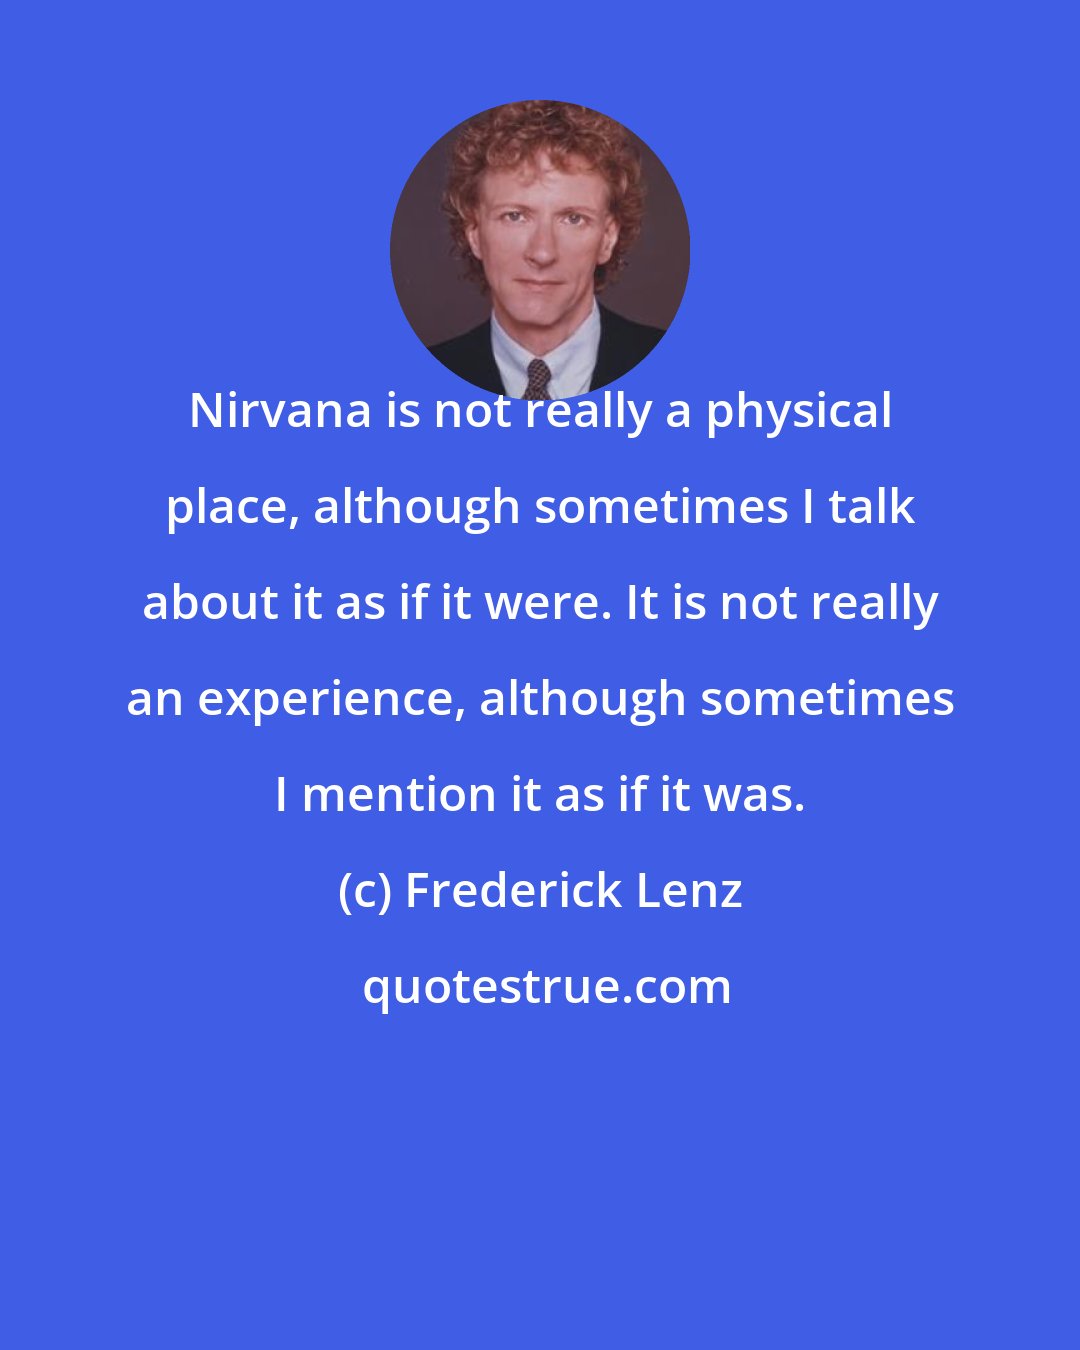 Frederick Lenz: Nirvana is not really a physical place, although sometimes I talk about it as if it were. It is not really an experience, although sometimes I mention it as if it was.